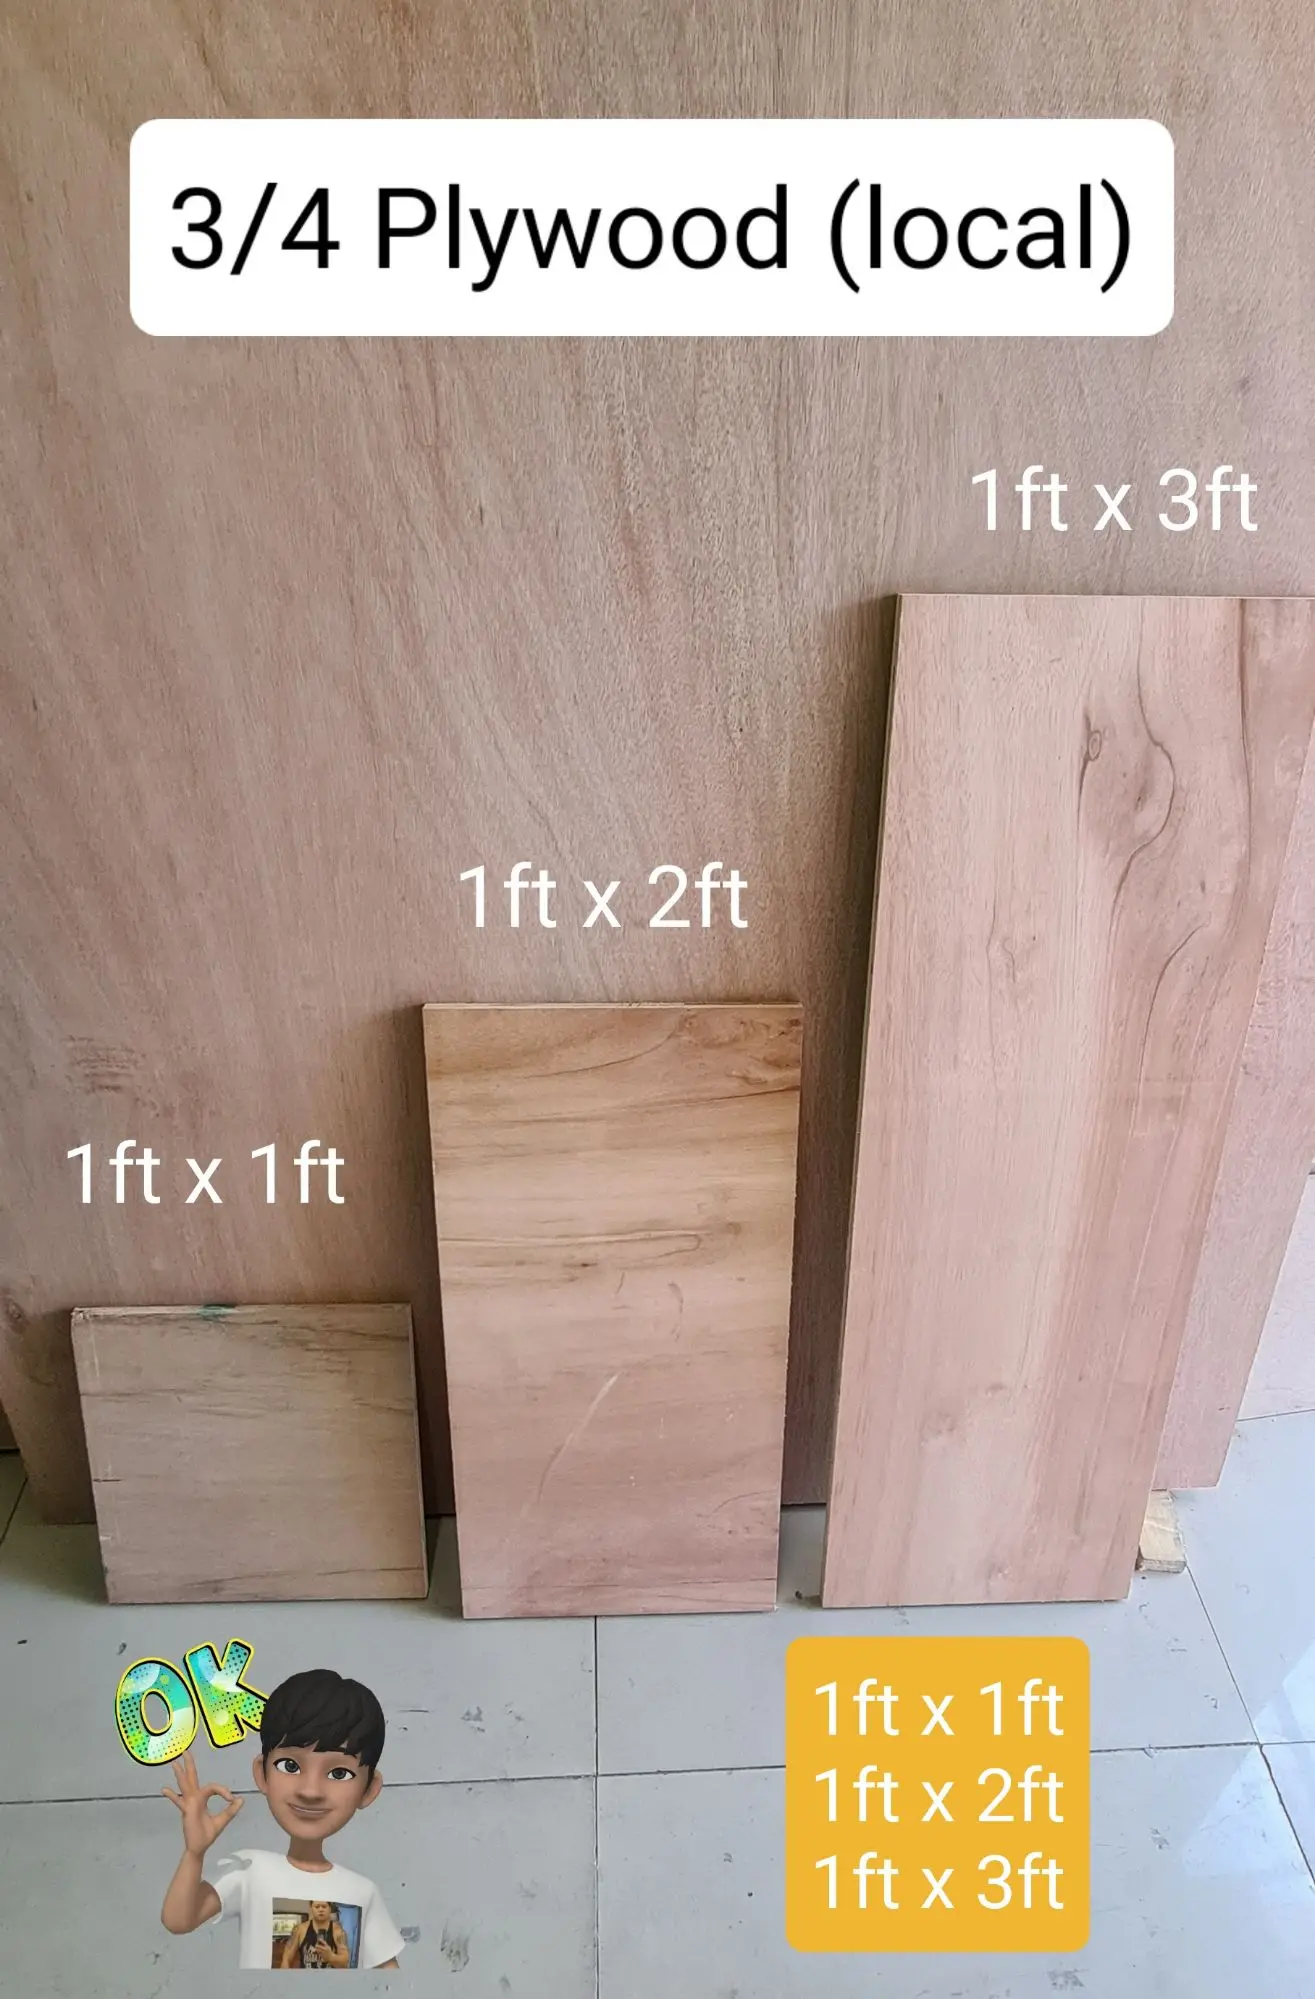 3/4 Plywood 1ft x 1ft to 3ft